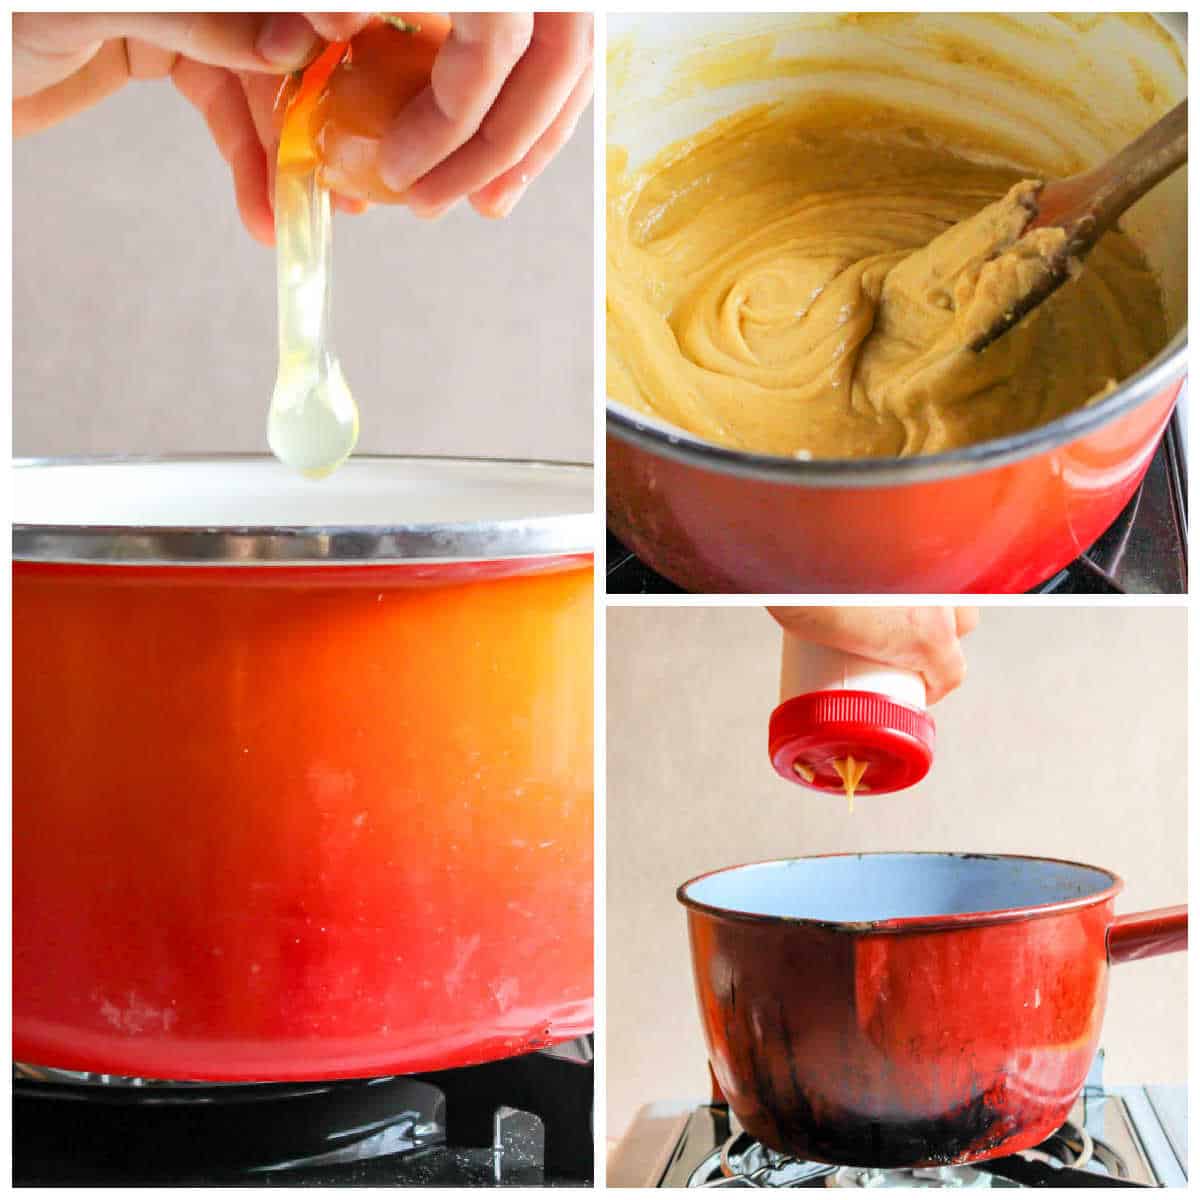 Collage of how to make churro dough: 1 cracking egg into pot, 2 stirred batter, 3 piping into oil.